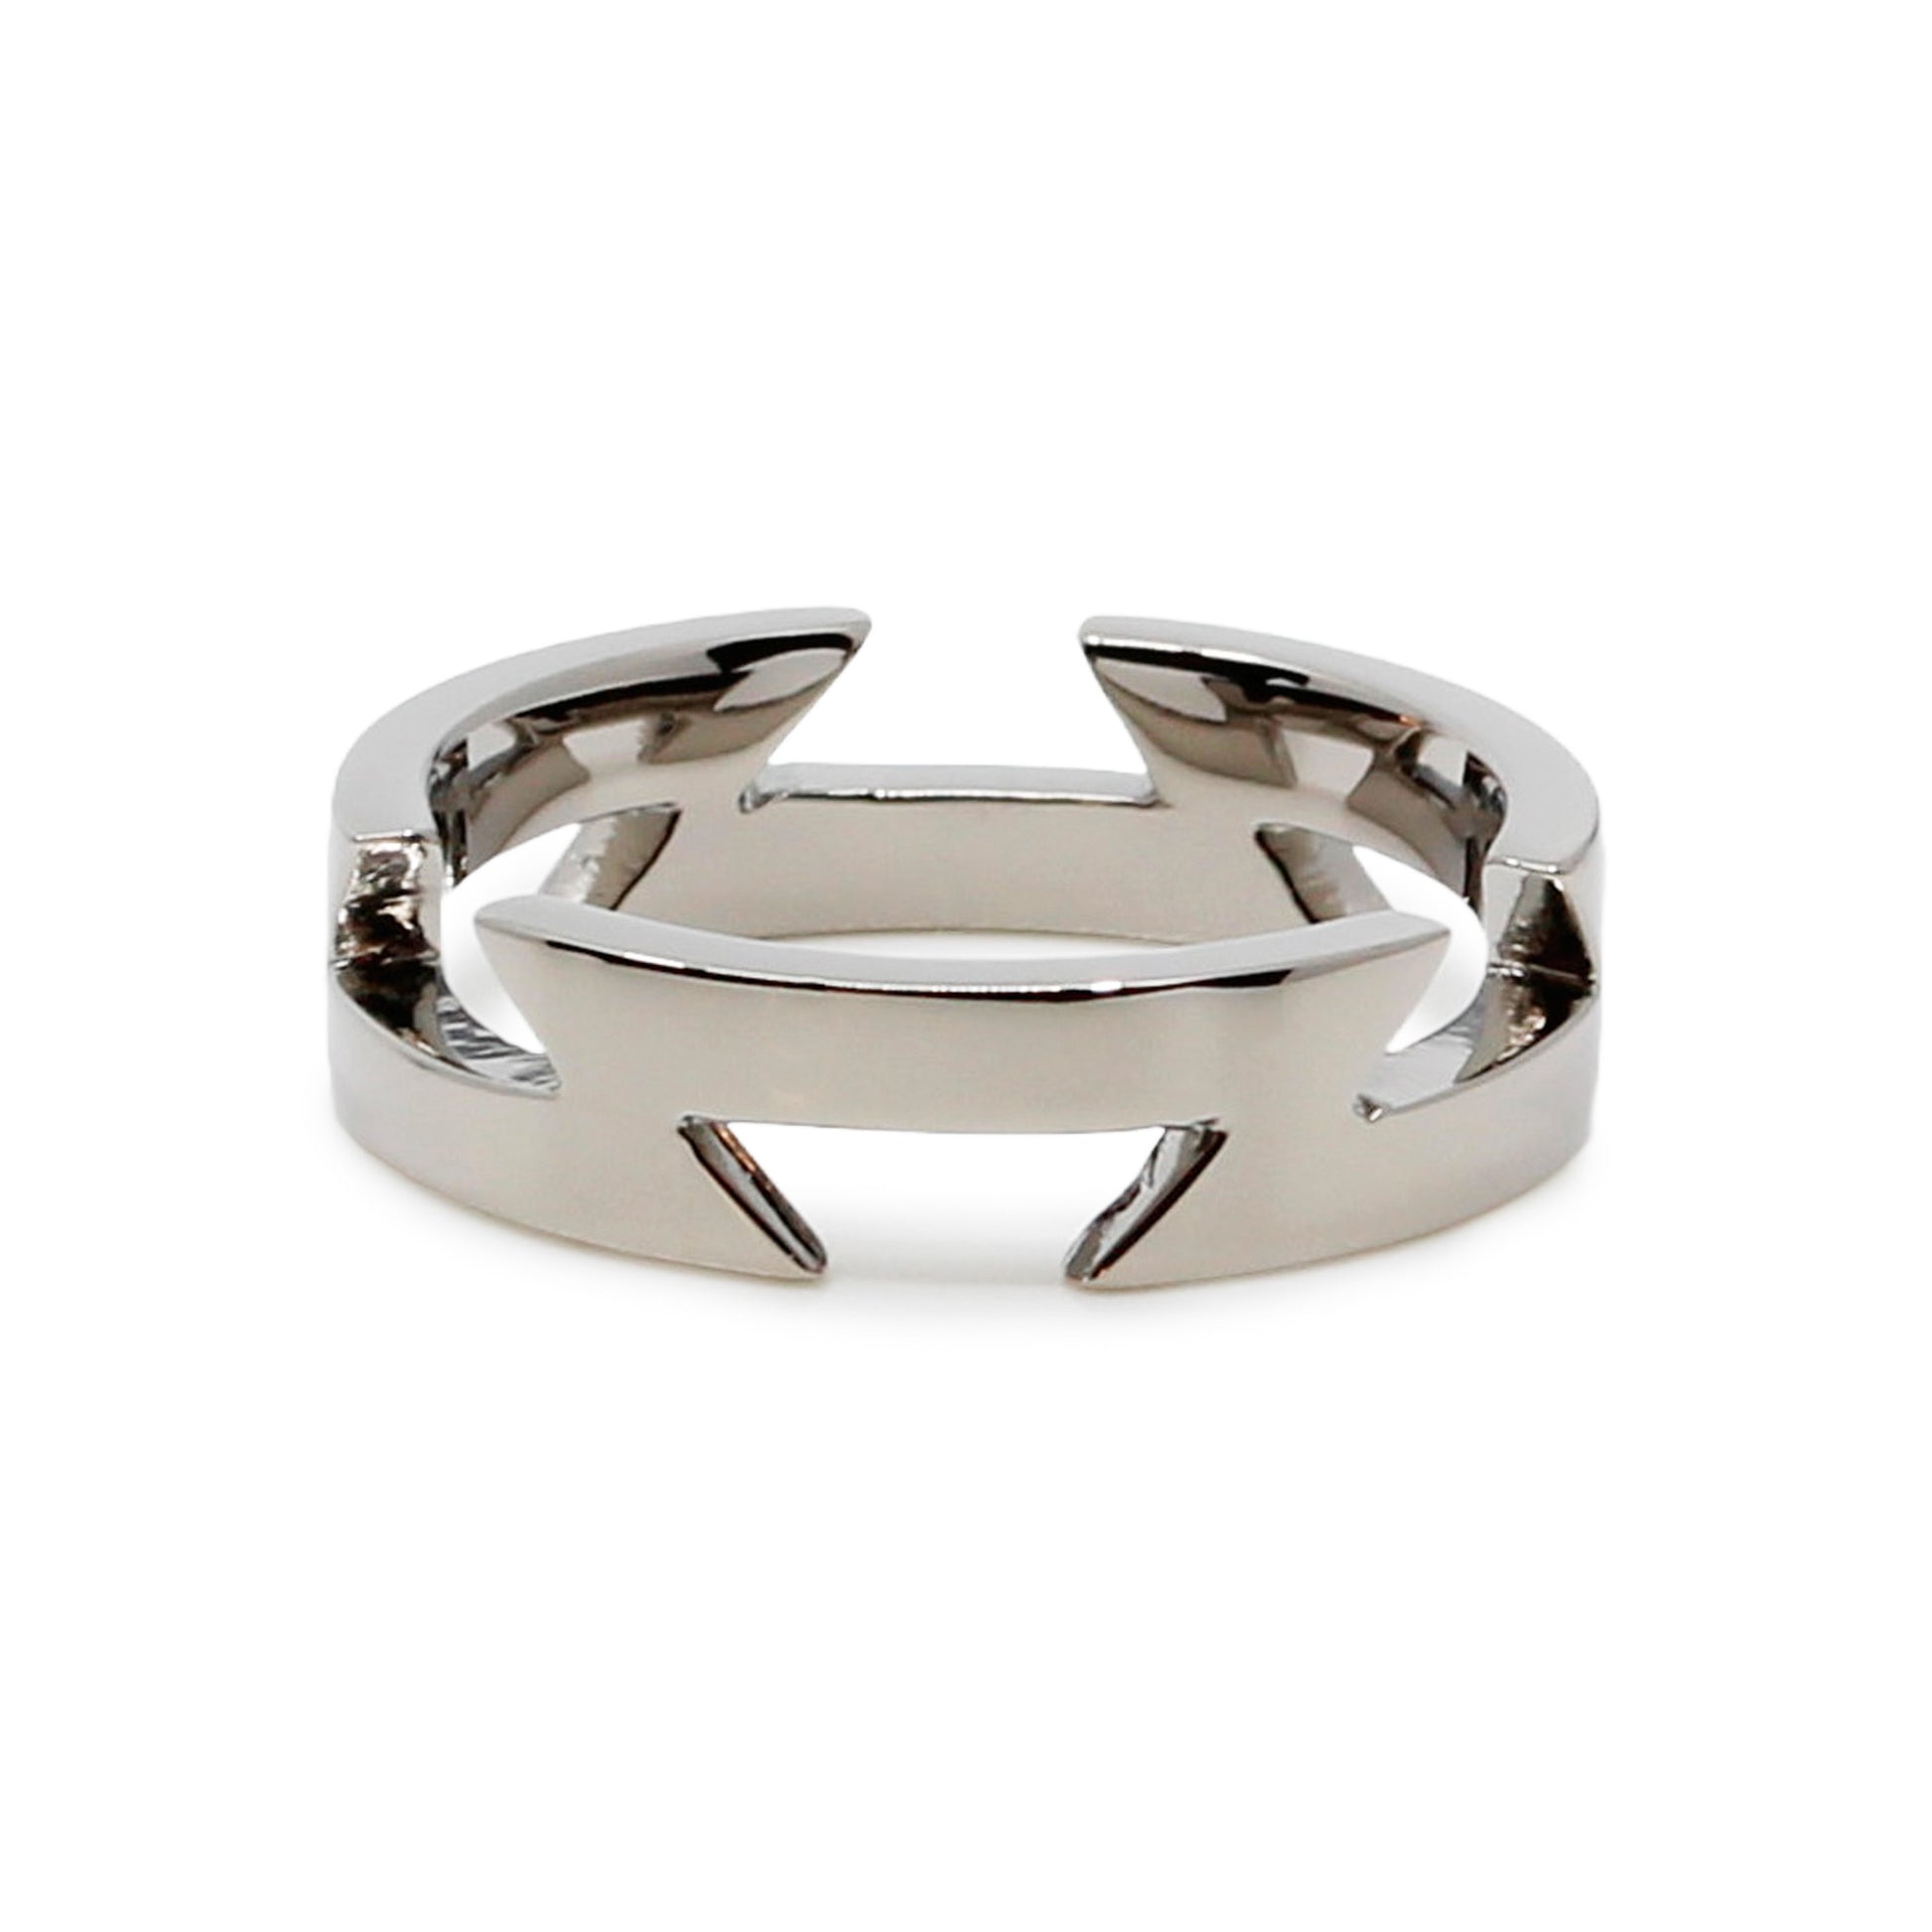 Single silver-colored titanium ring with zig-zag pattern, 6 mm thick. Image shows front view of the ring.